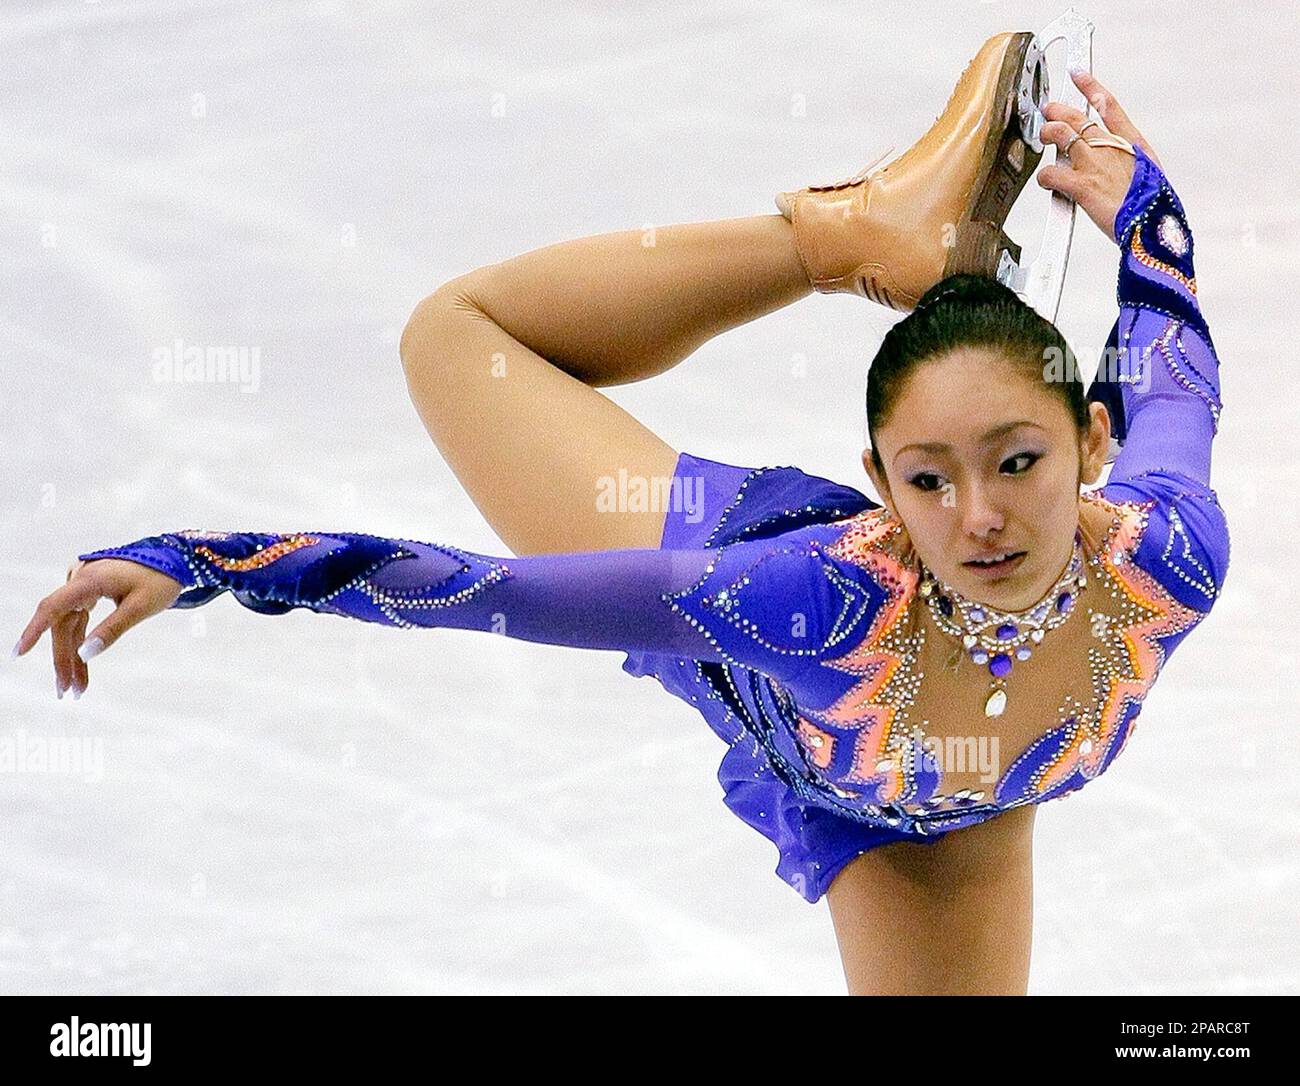 Miki Ando of Japan competes in the ladies short program during the NHK Trophy Figure Skating Grand Prix in Sendai, northern Japan, Friday, Nov. 30, 2007. (AP Photo/Itsuo Inouye) Stock Photo